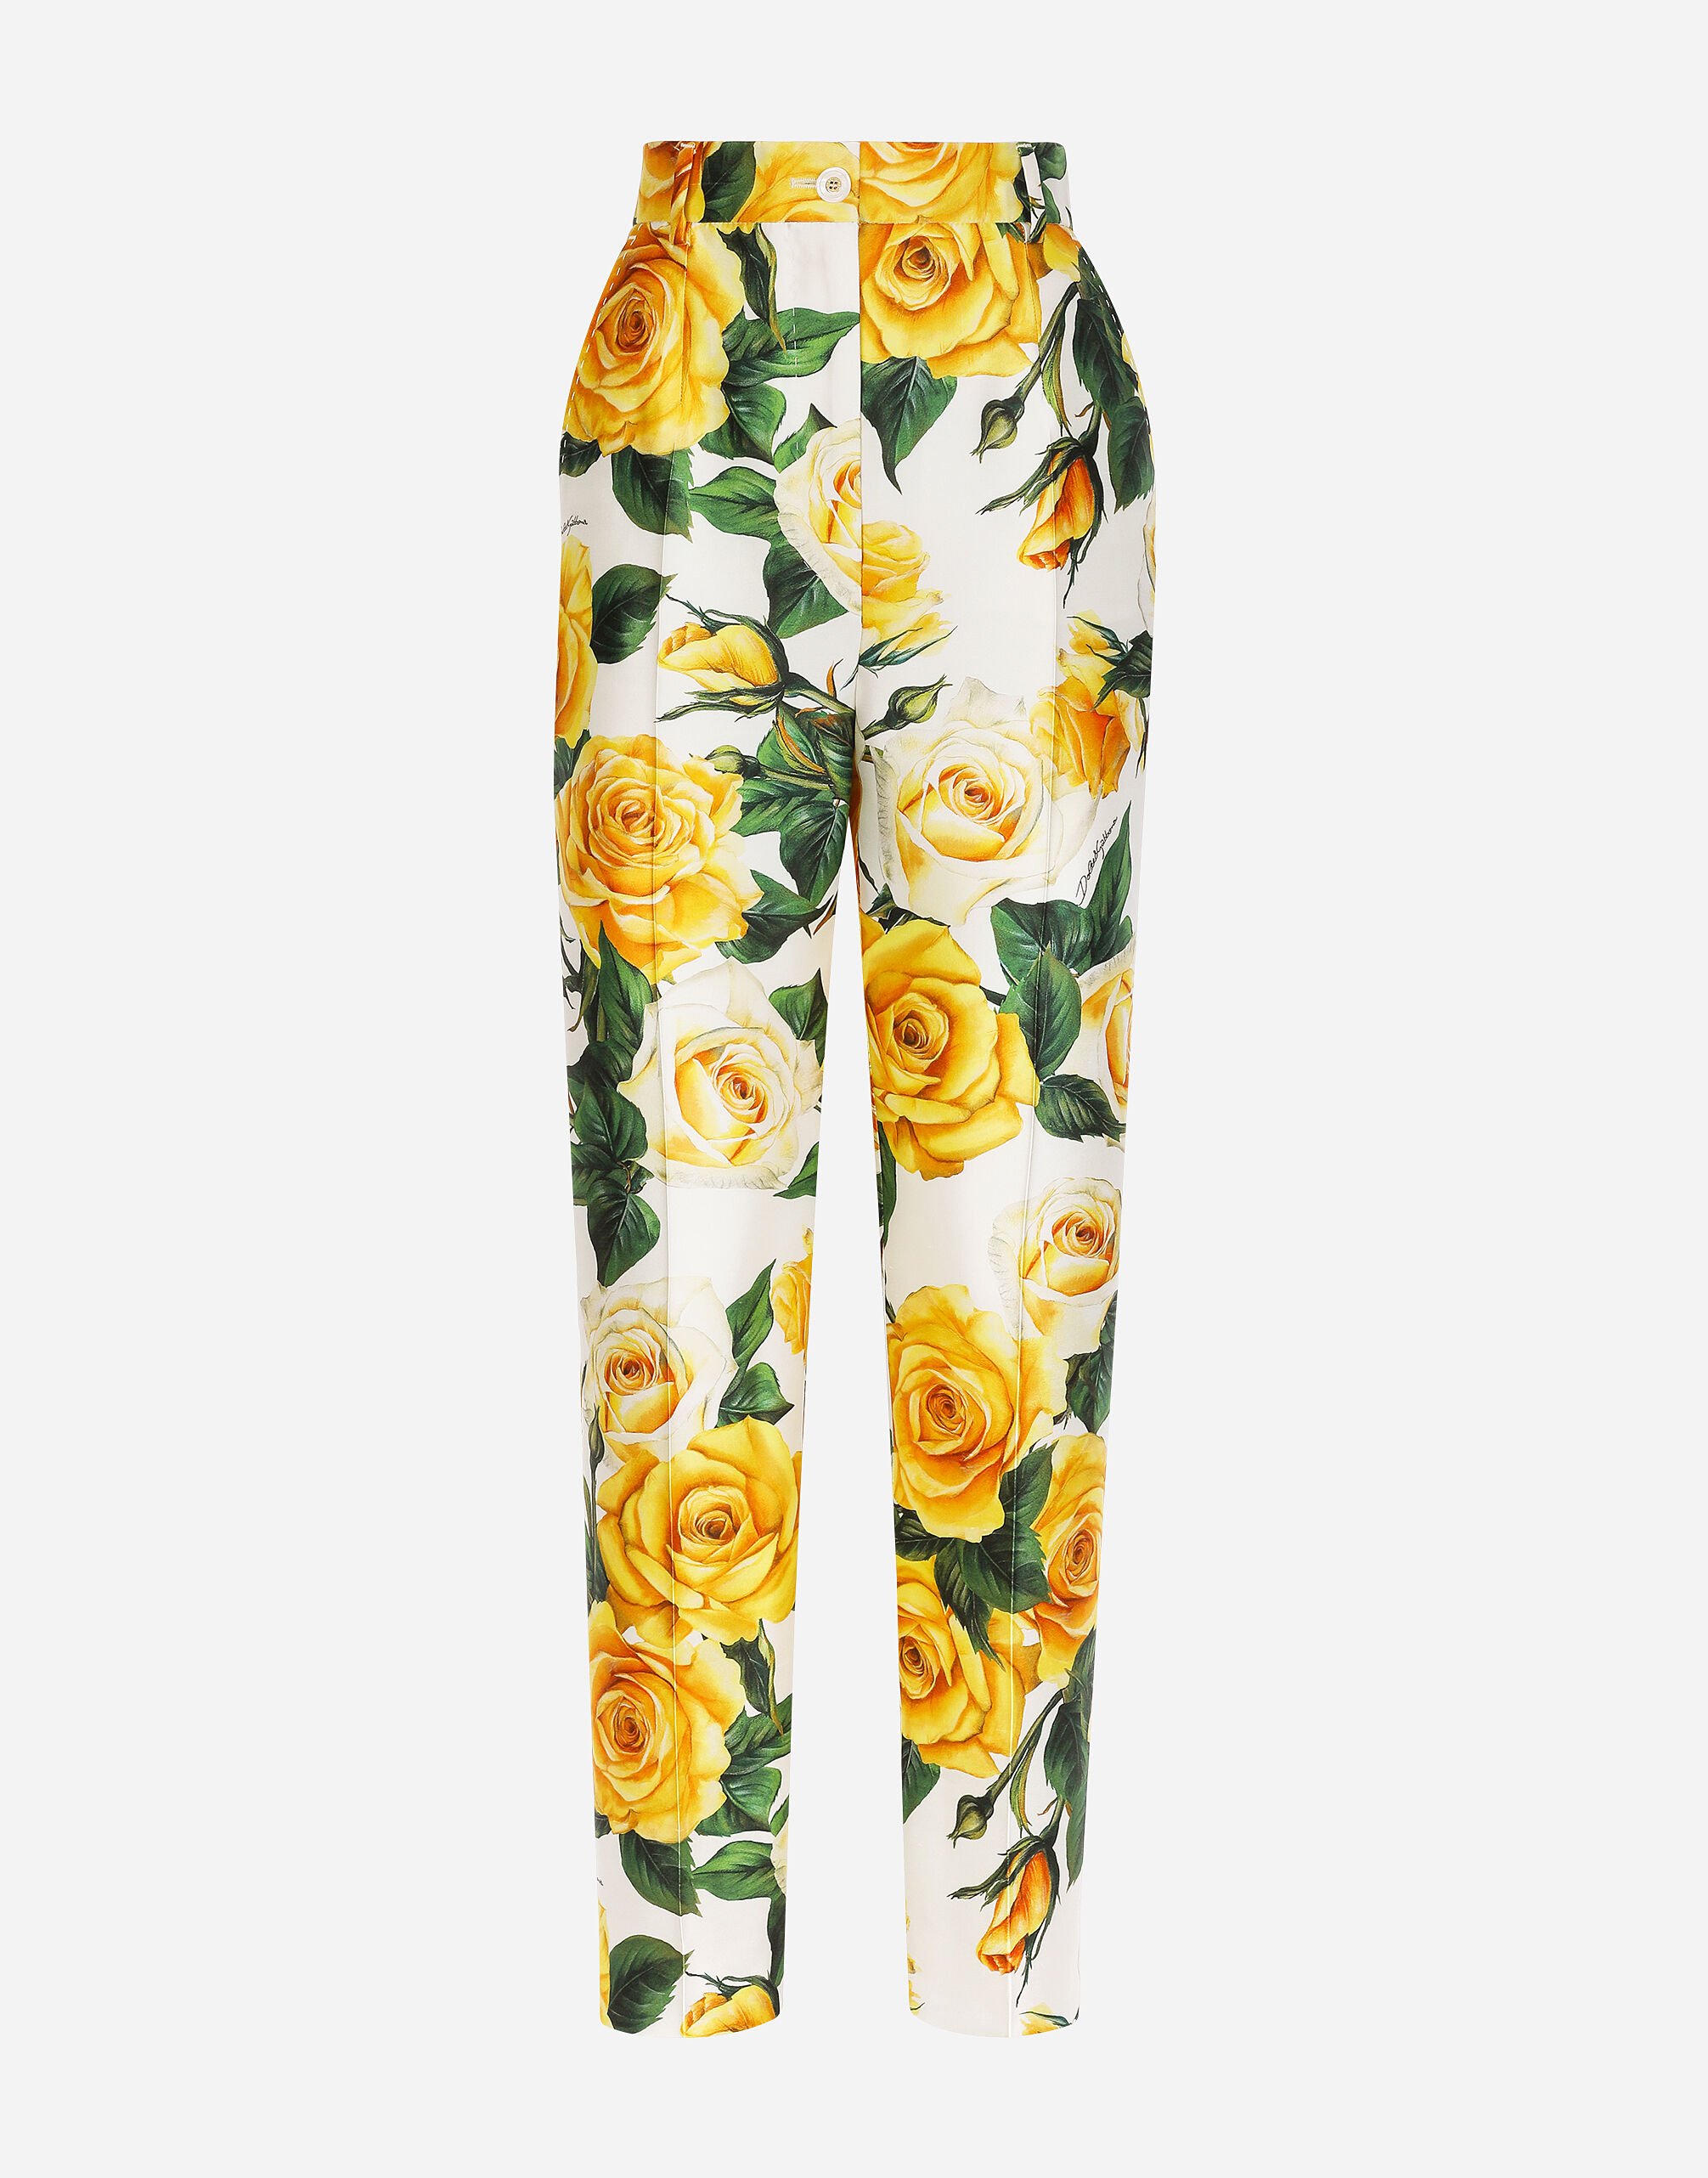 Dolce & Gabbana High-waisted mikado pants with yellow rose print Green BB7158AW437